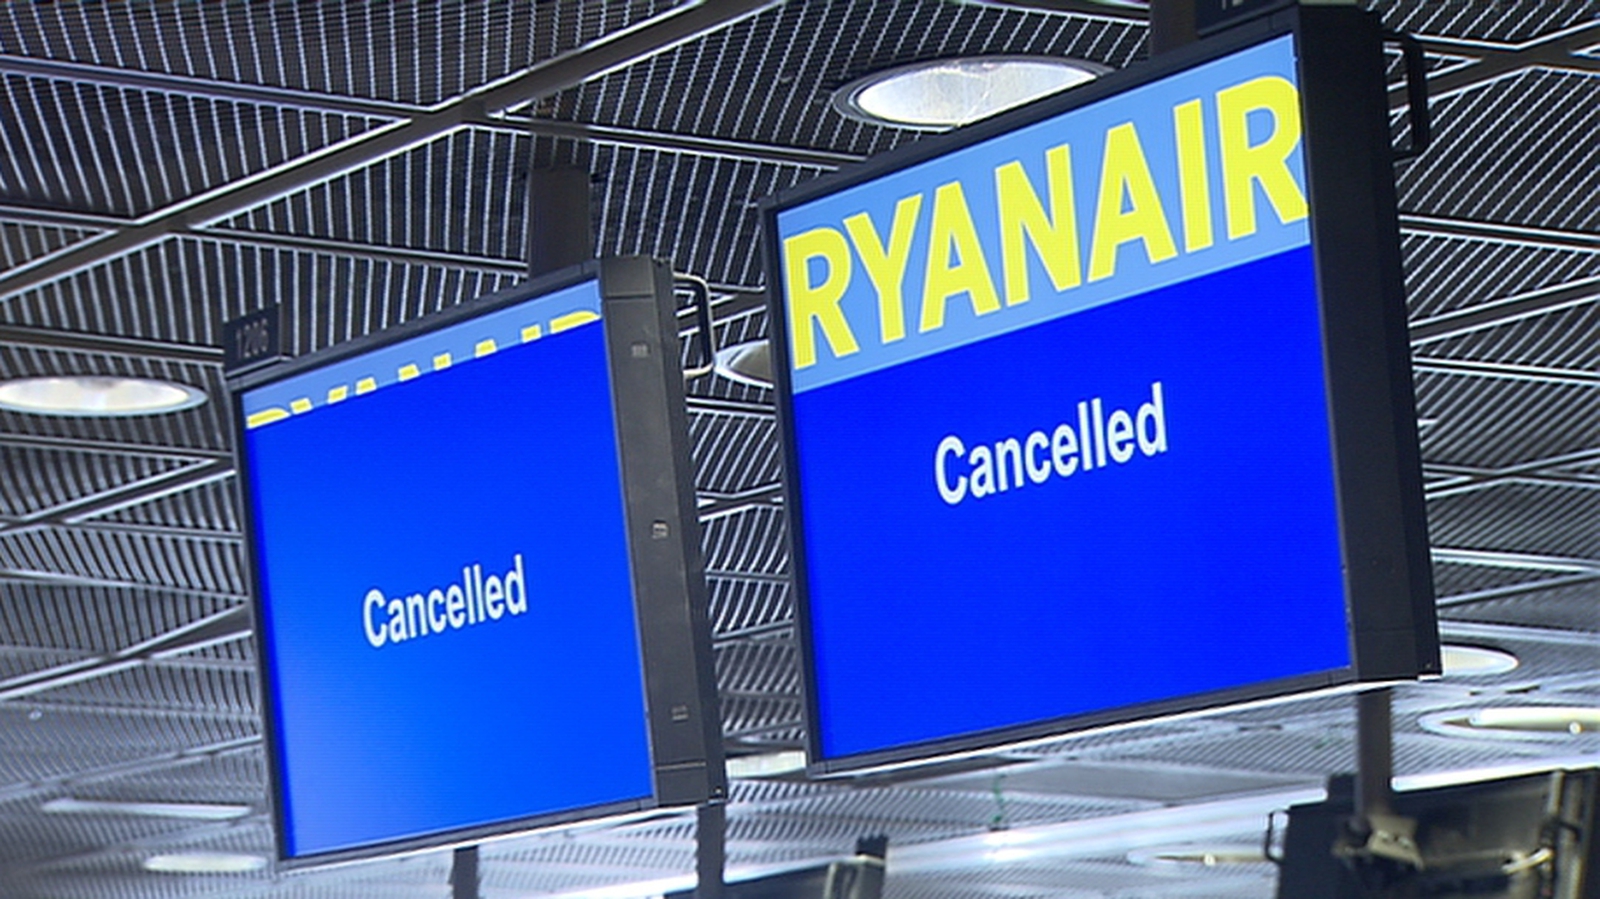 What I need to know if my Ryanair flight is cancelled